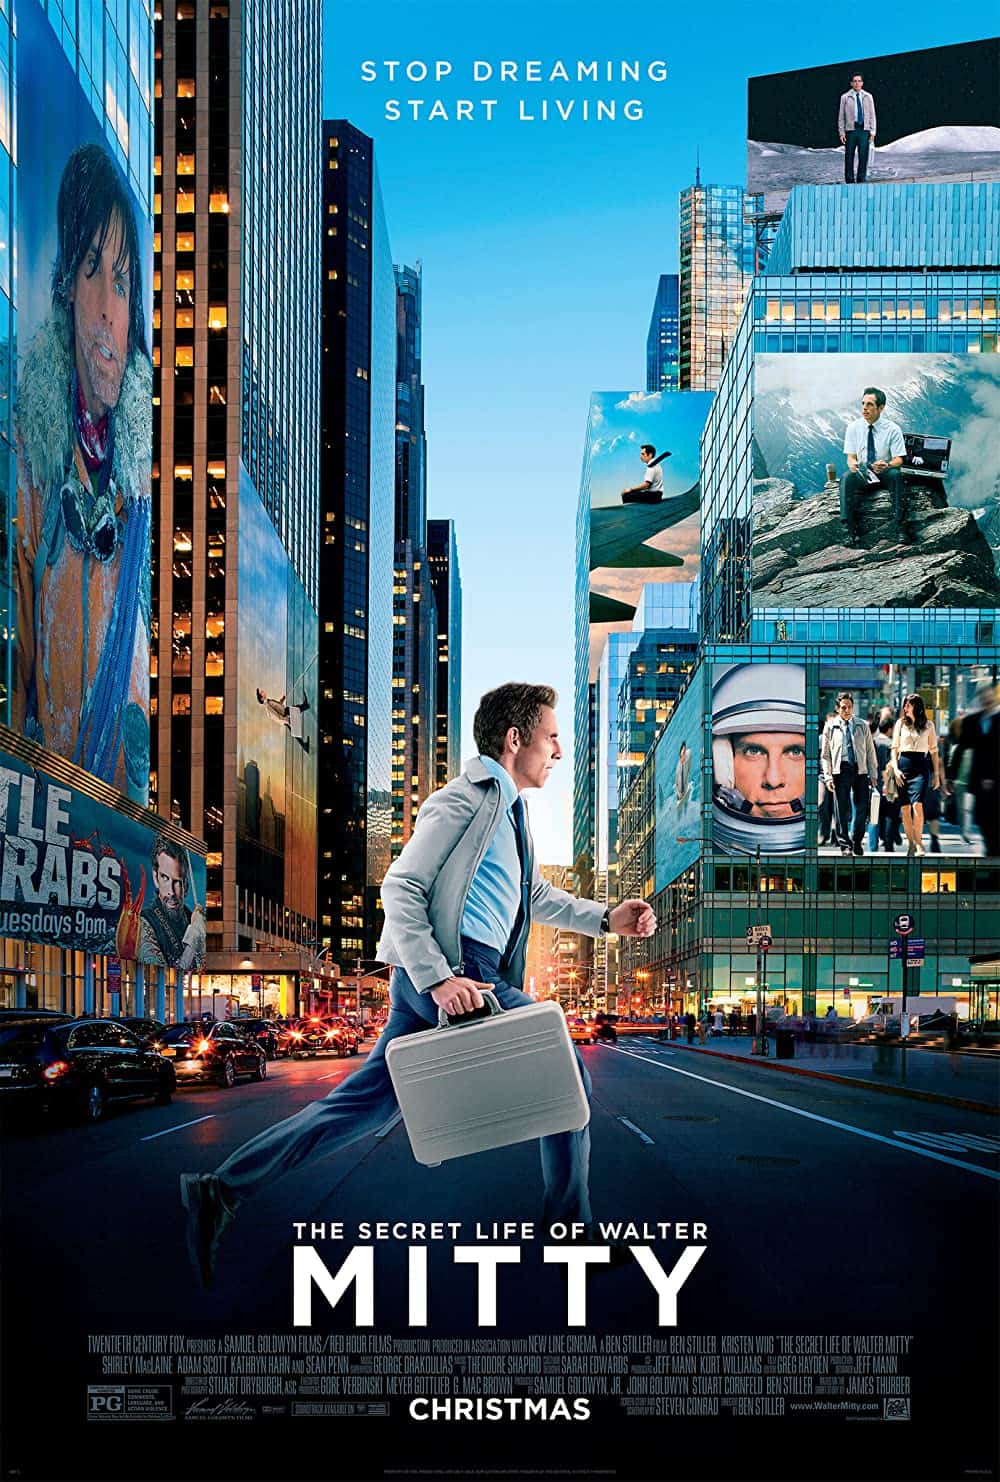 The Secret Life of Walter Mitty ( 2013) 15 Best Nature Movies to Add in Your Watchlist